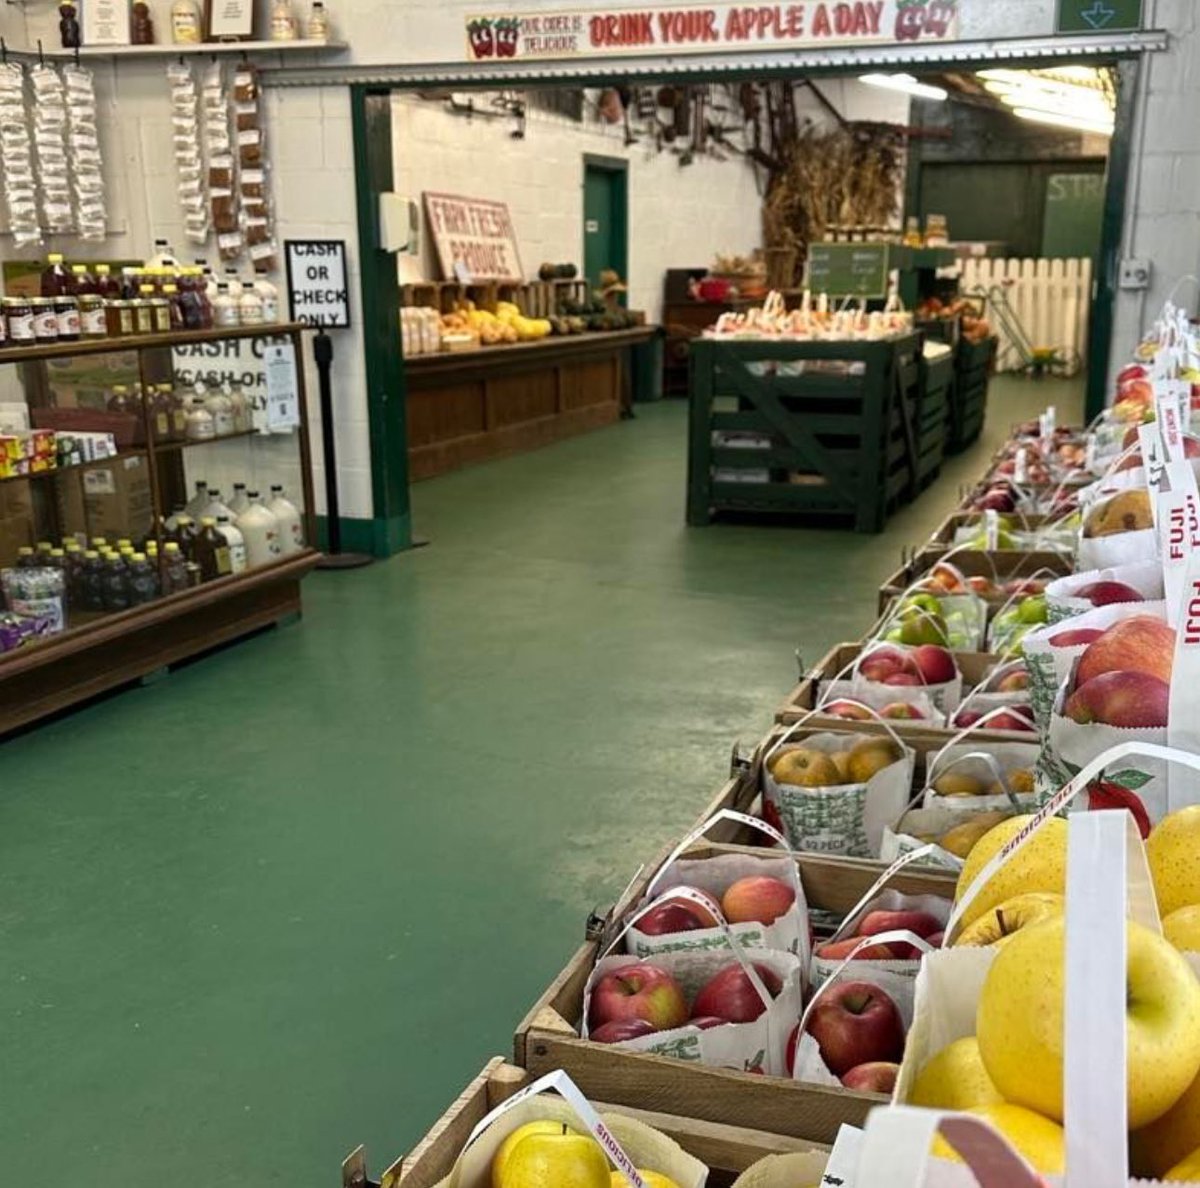 Enjoy fresh Michigan apples, pies, and cider - always great for holiday gatherings. 🍎 We still have plenty of donuts, candy, caramel apples, jams, honey, syrup, squash, and popping corn as well. Open 9-5:30 #MichiganAgriculture #MichiganCiderMills #Cider #OaklandCounty